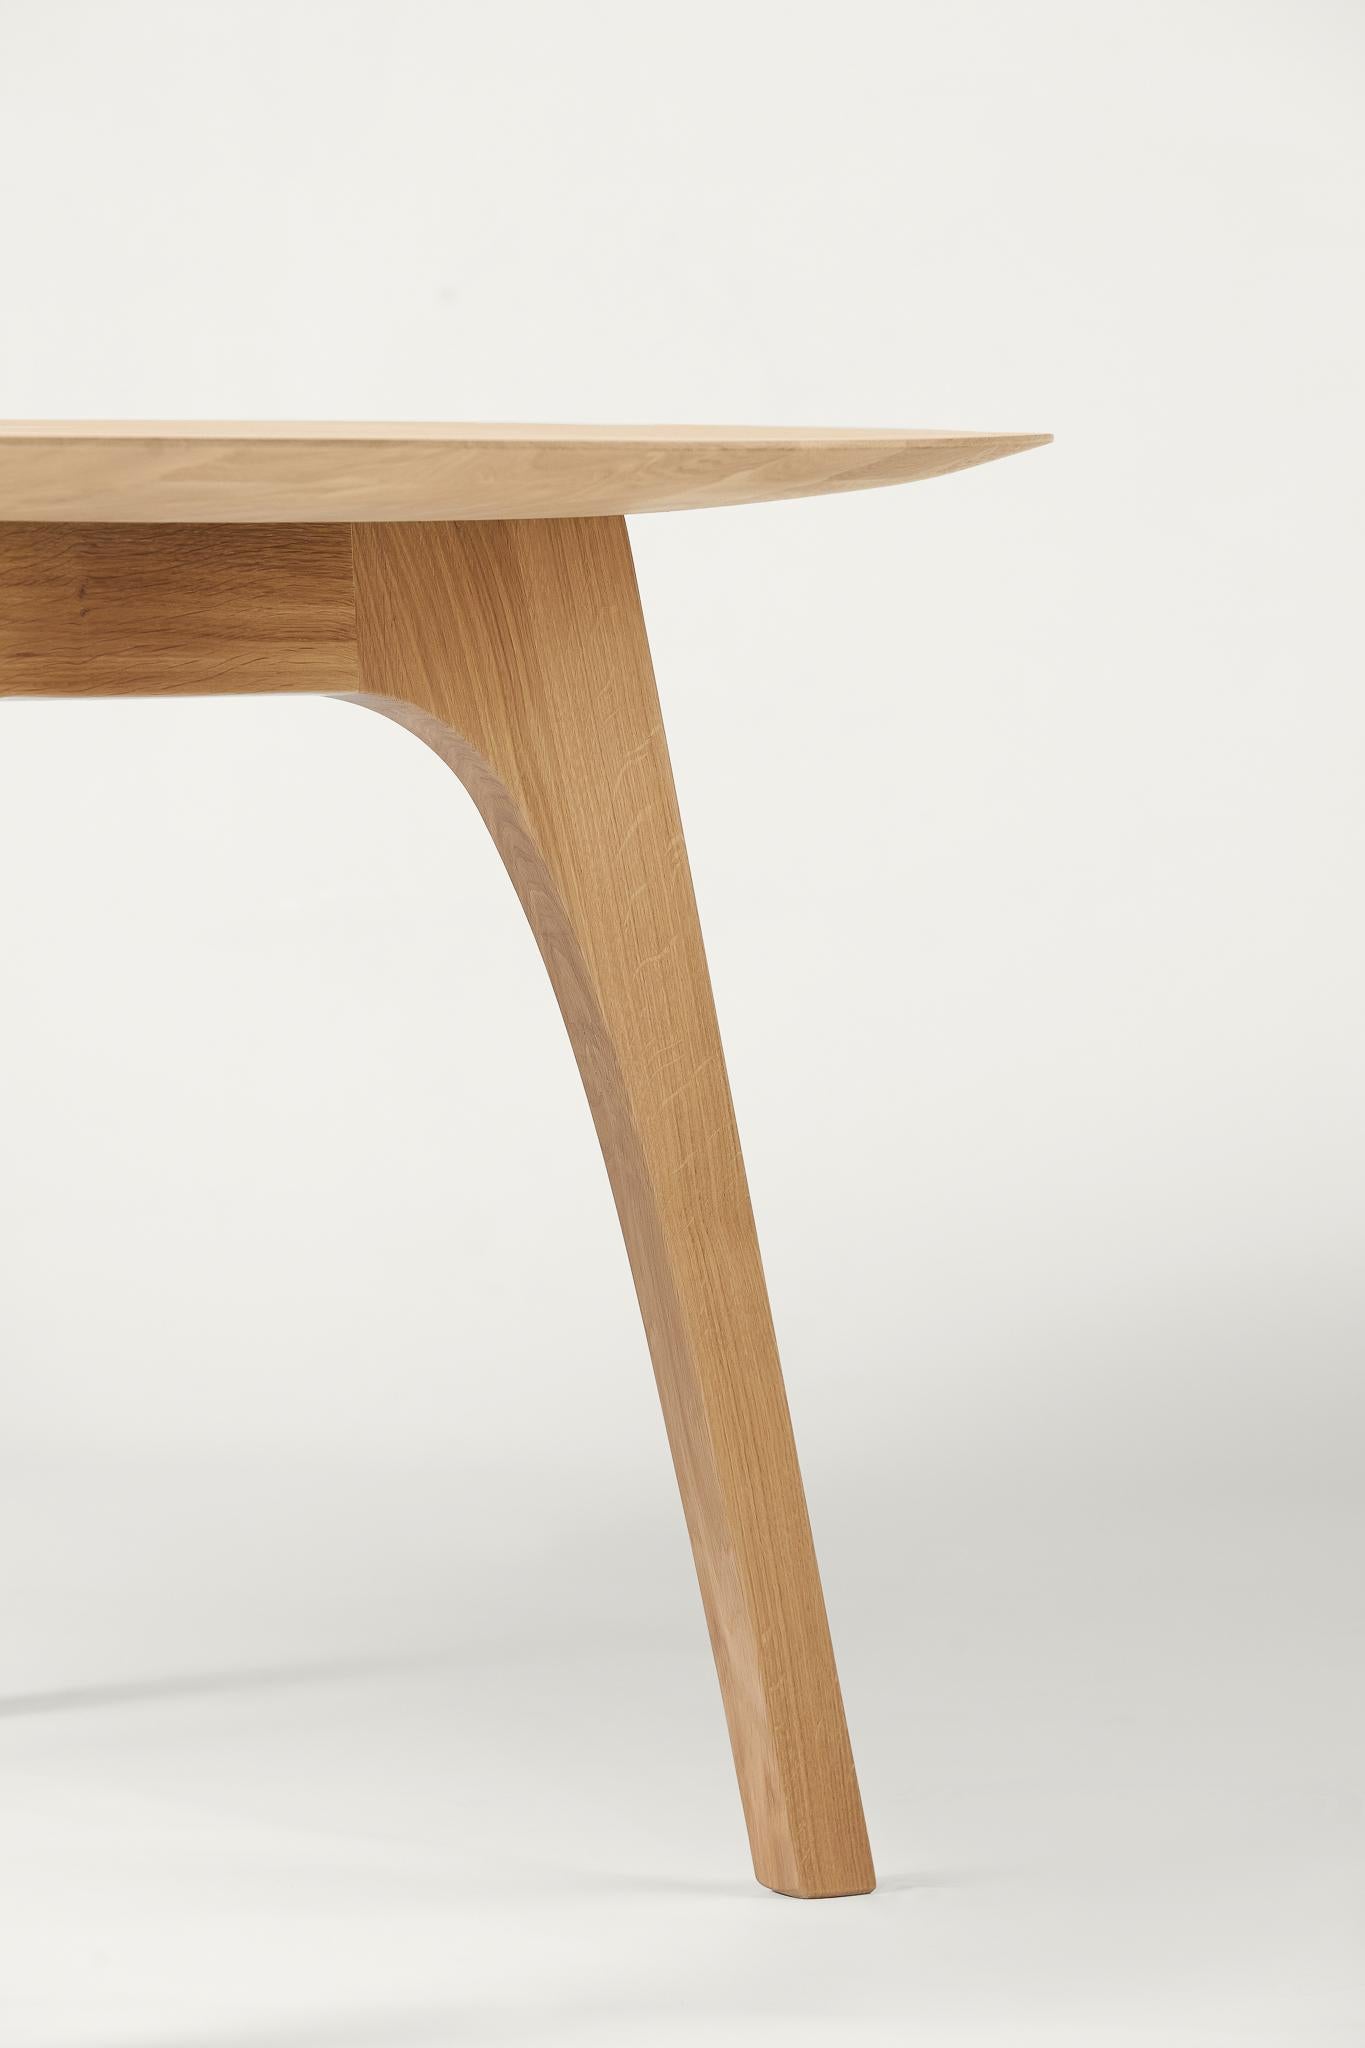 The heron-table is both perfect for a private home as wel I as for professional spaces.
 
Its carved, solid oak tabletop gives it a light, sublime appearance and the contour of the legs resembles the flowing lines of the heron-chair’s backrest or